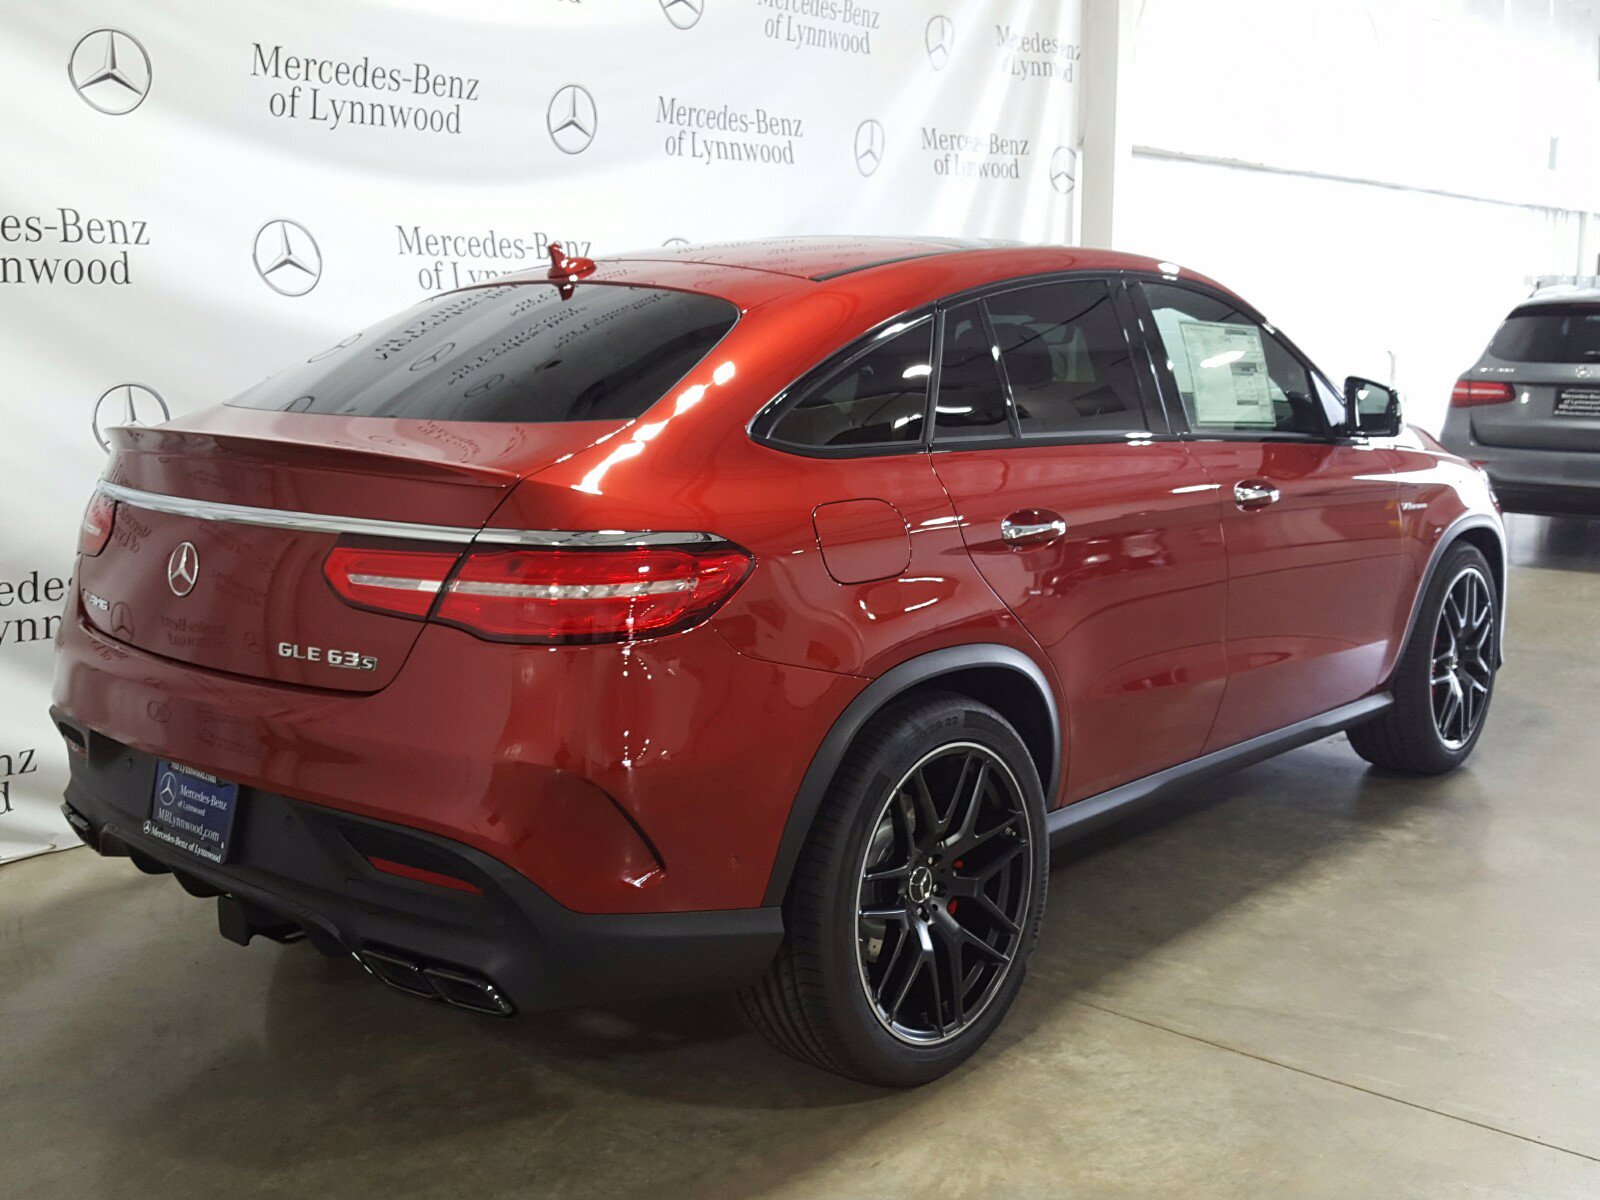 New 2019 Mercedes Benz Amg Gle 63 S 4matic Coupe